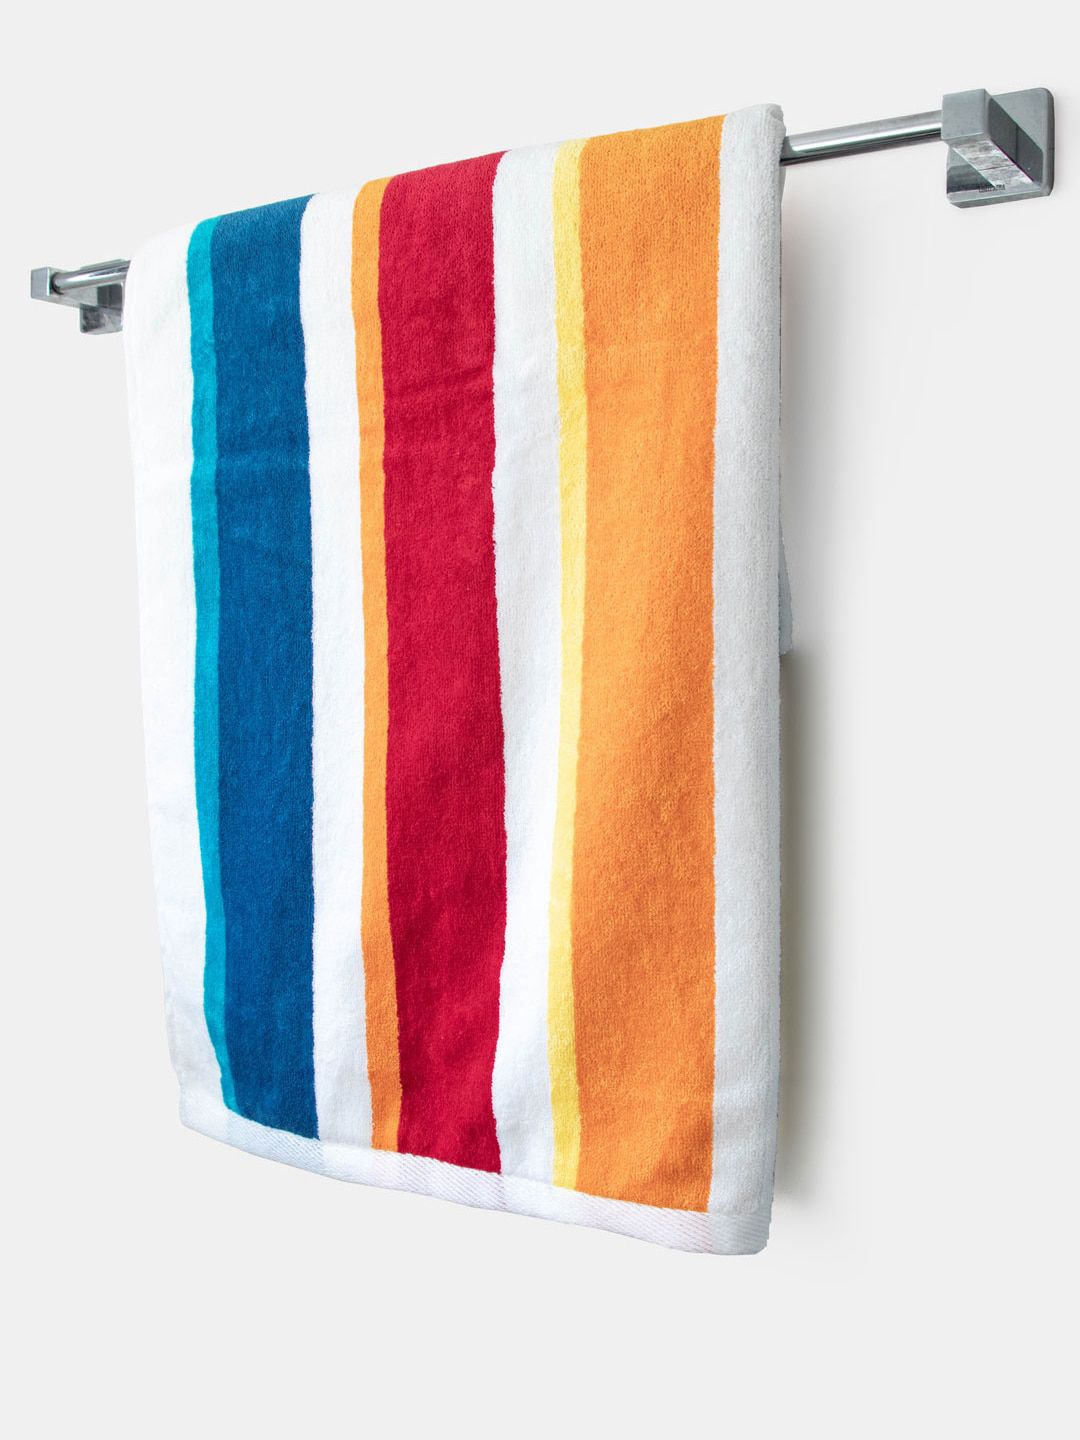 St Cloud Blue & White Striped 450 GSM 100% Cotton Bath Towel Price in India